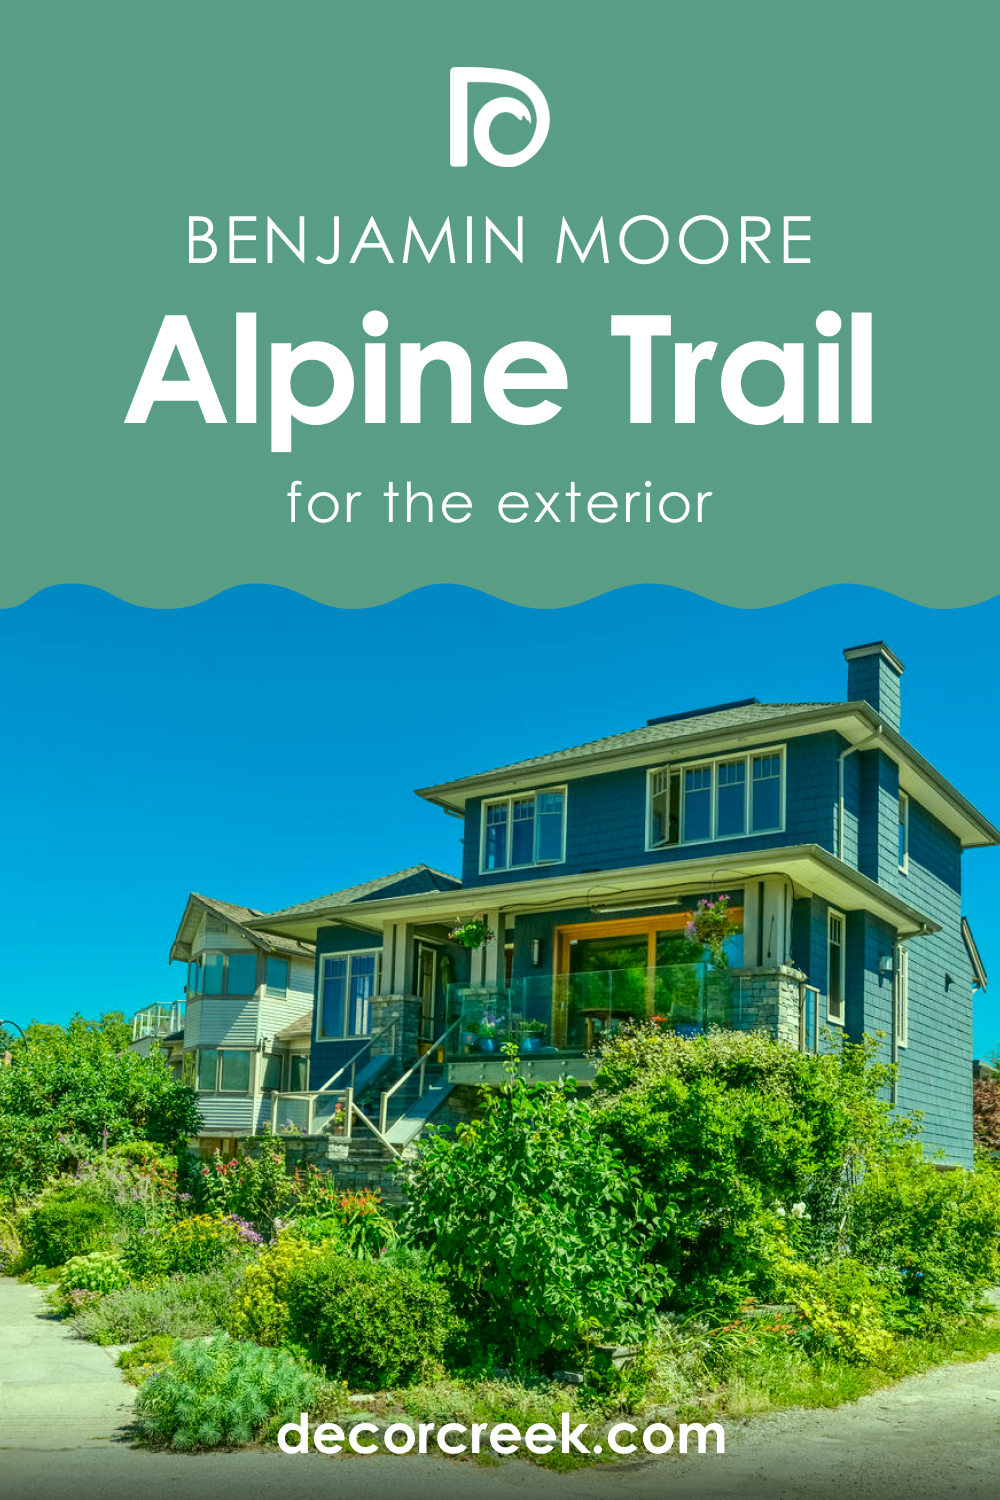 Alpine Trail 622 for an Exterior